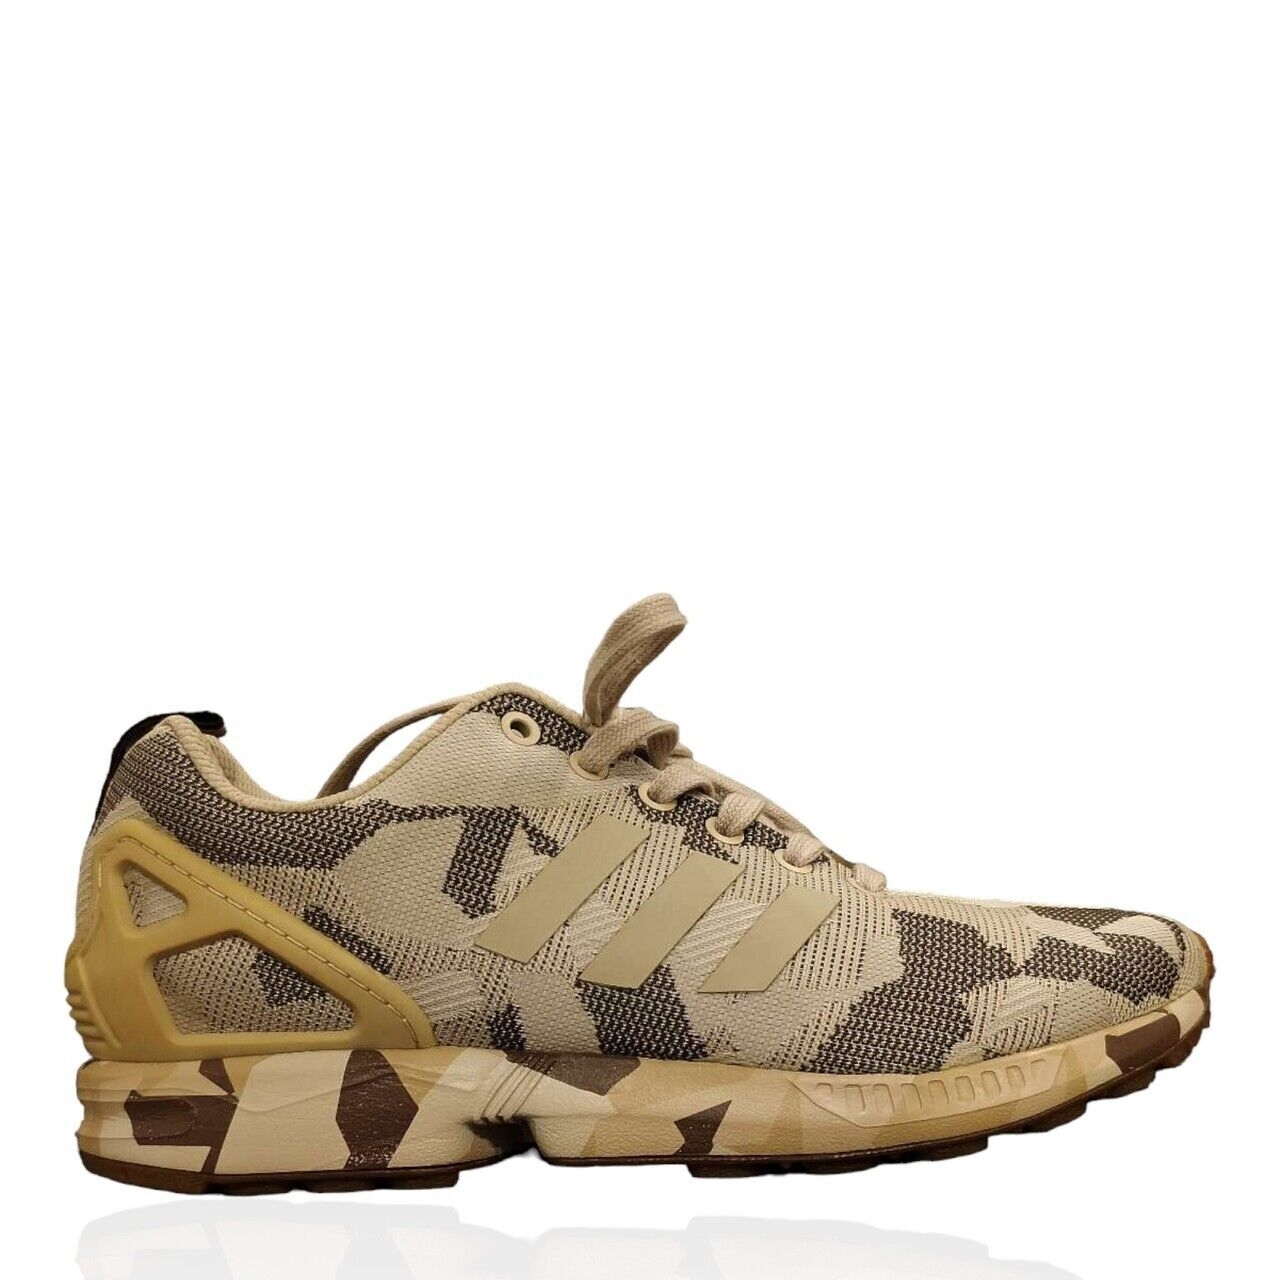 Adidas ZX Flux Clear Brown Sneakers